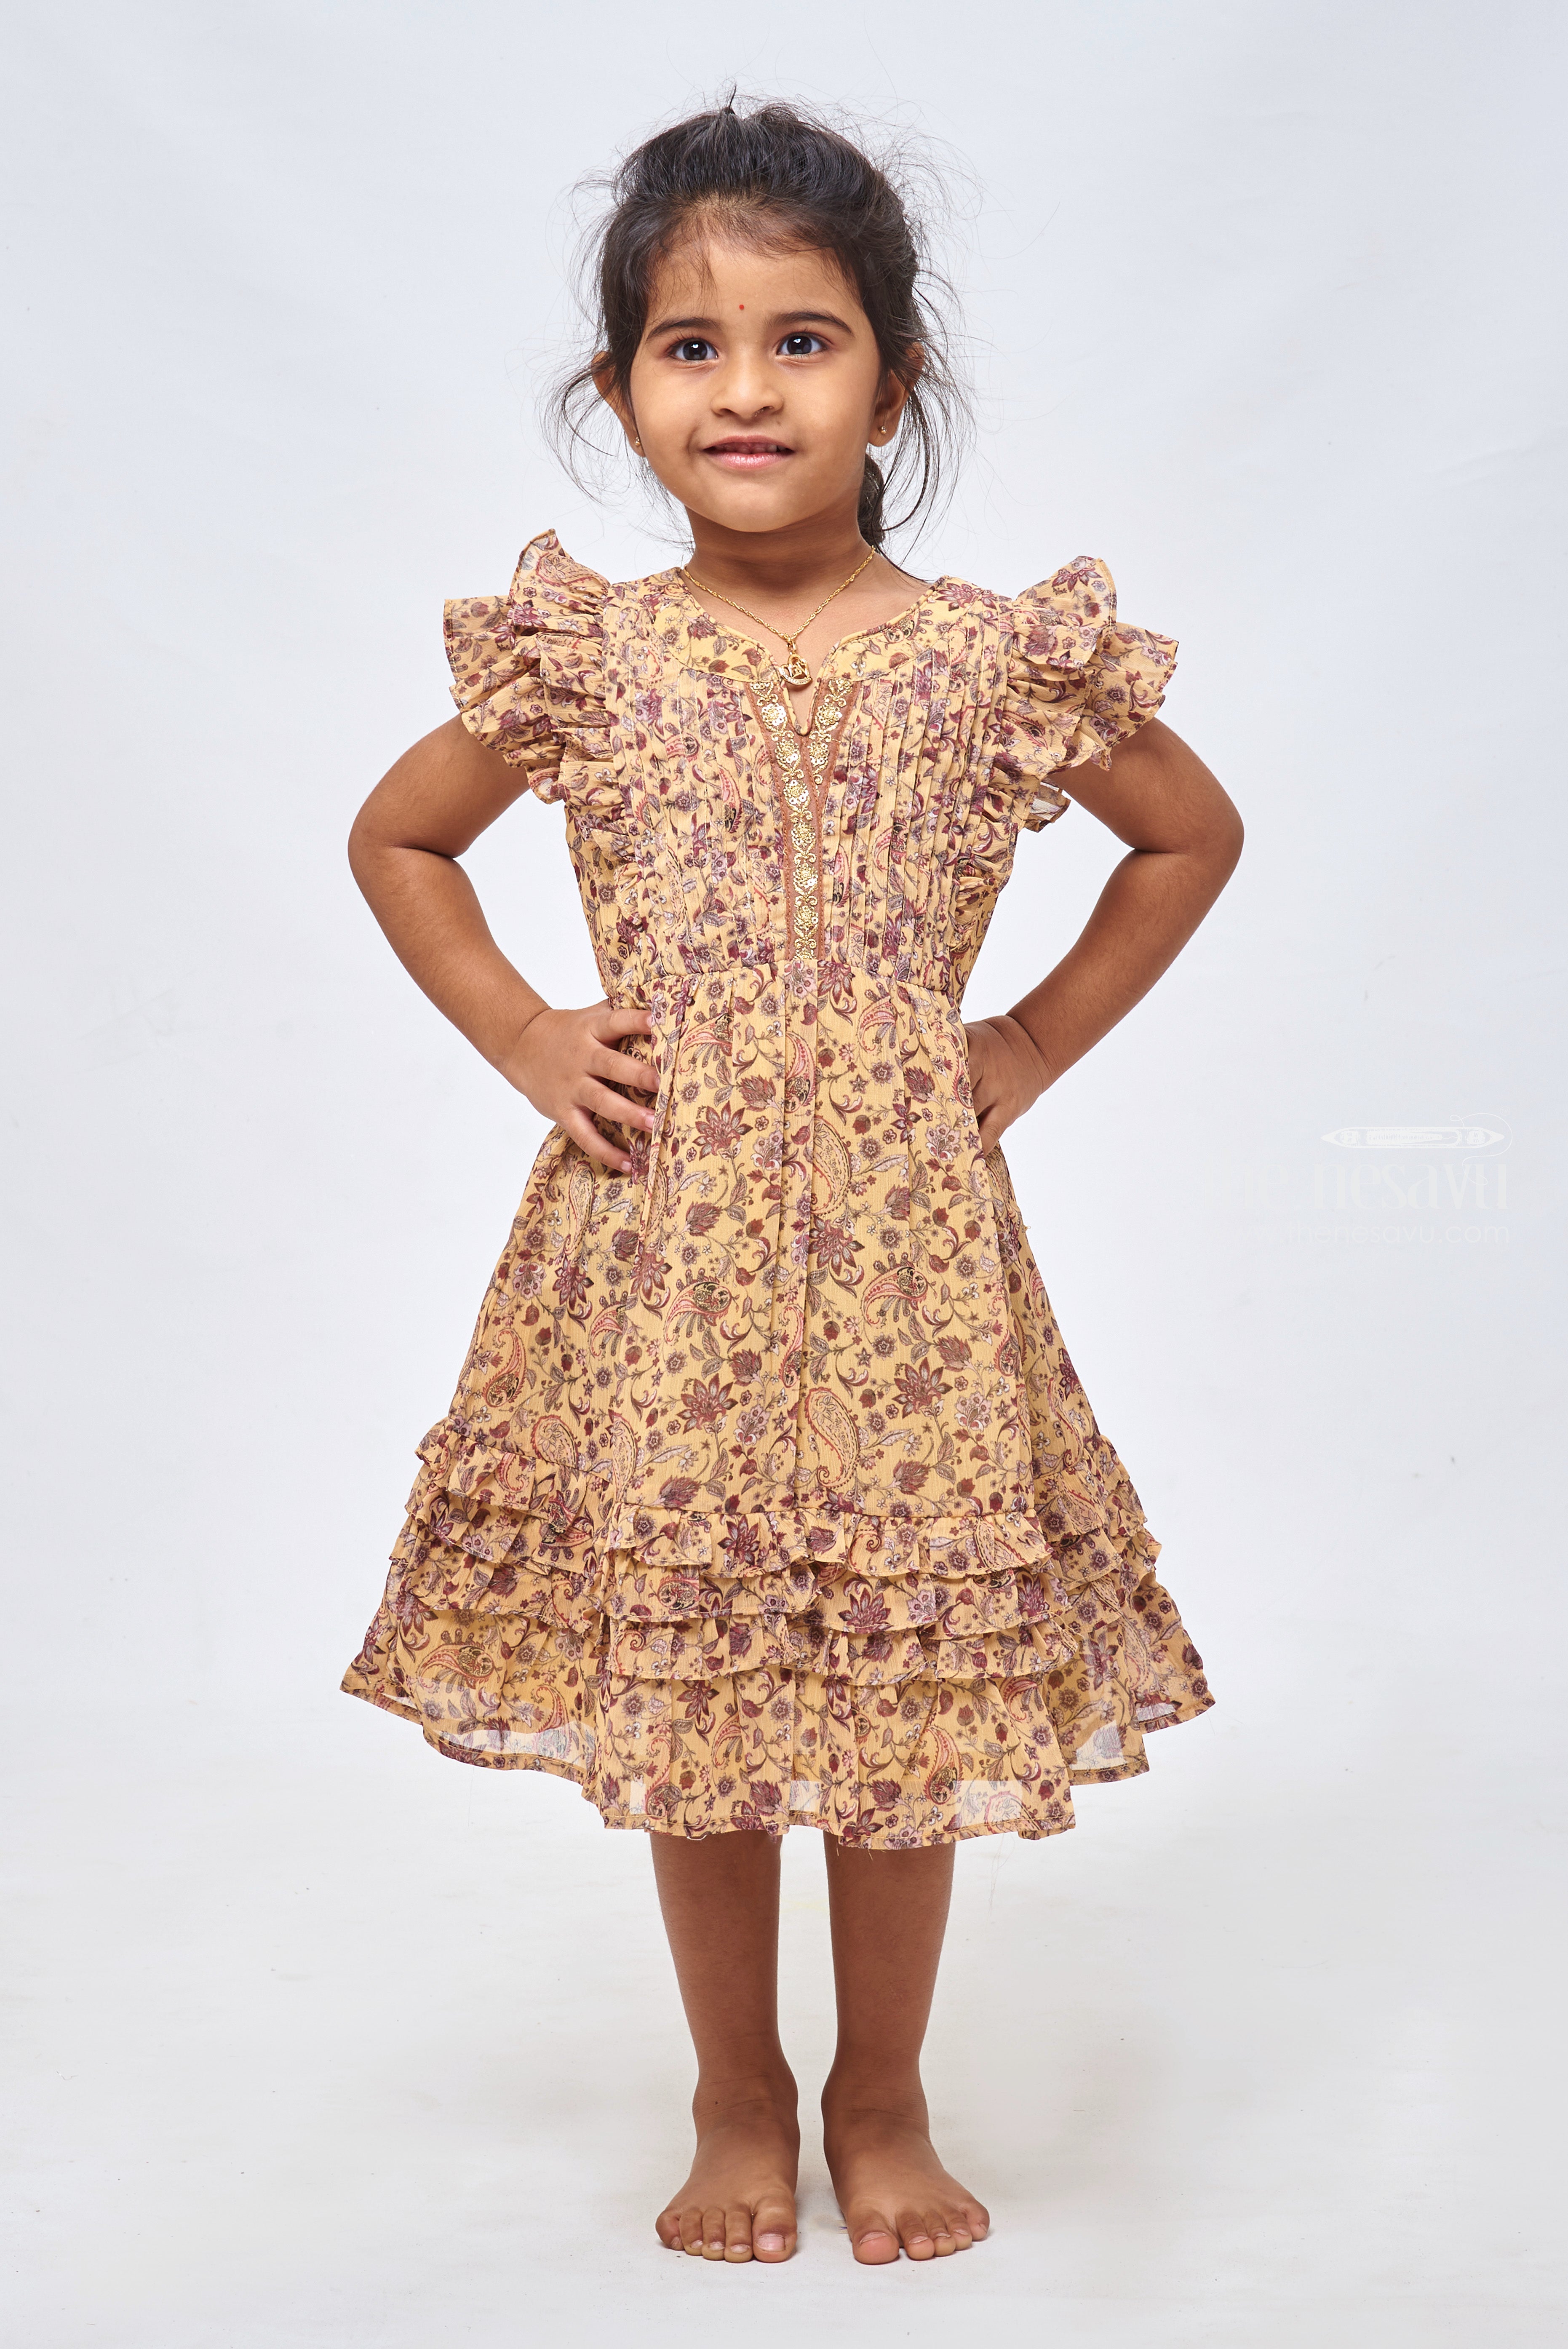 Stunning Cotton Long Frocks for Girls  Cotton dress pattern indian, Long  frocks for girls, Dress patterns